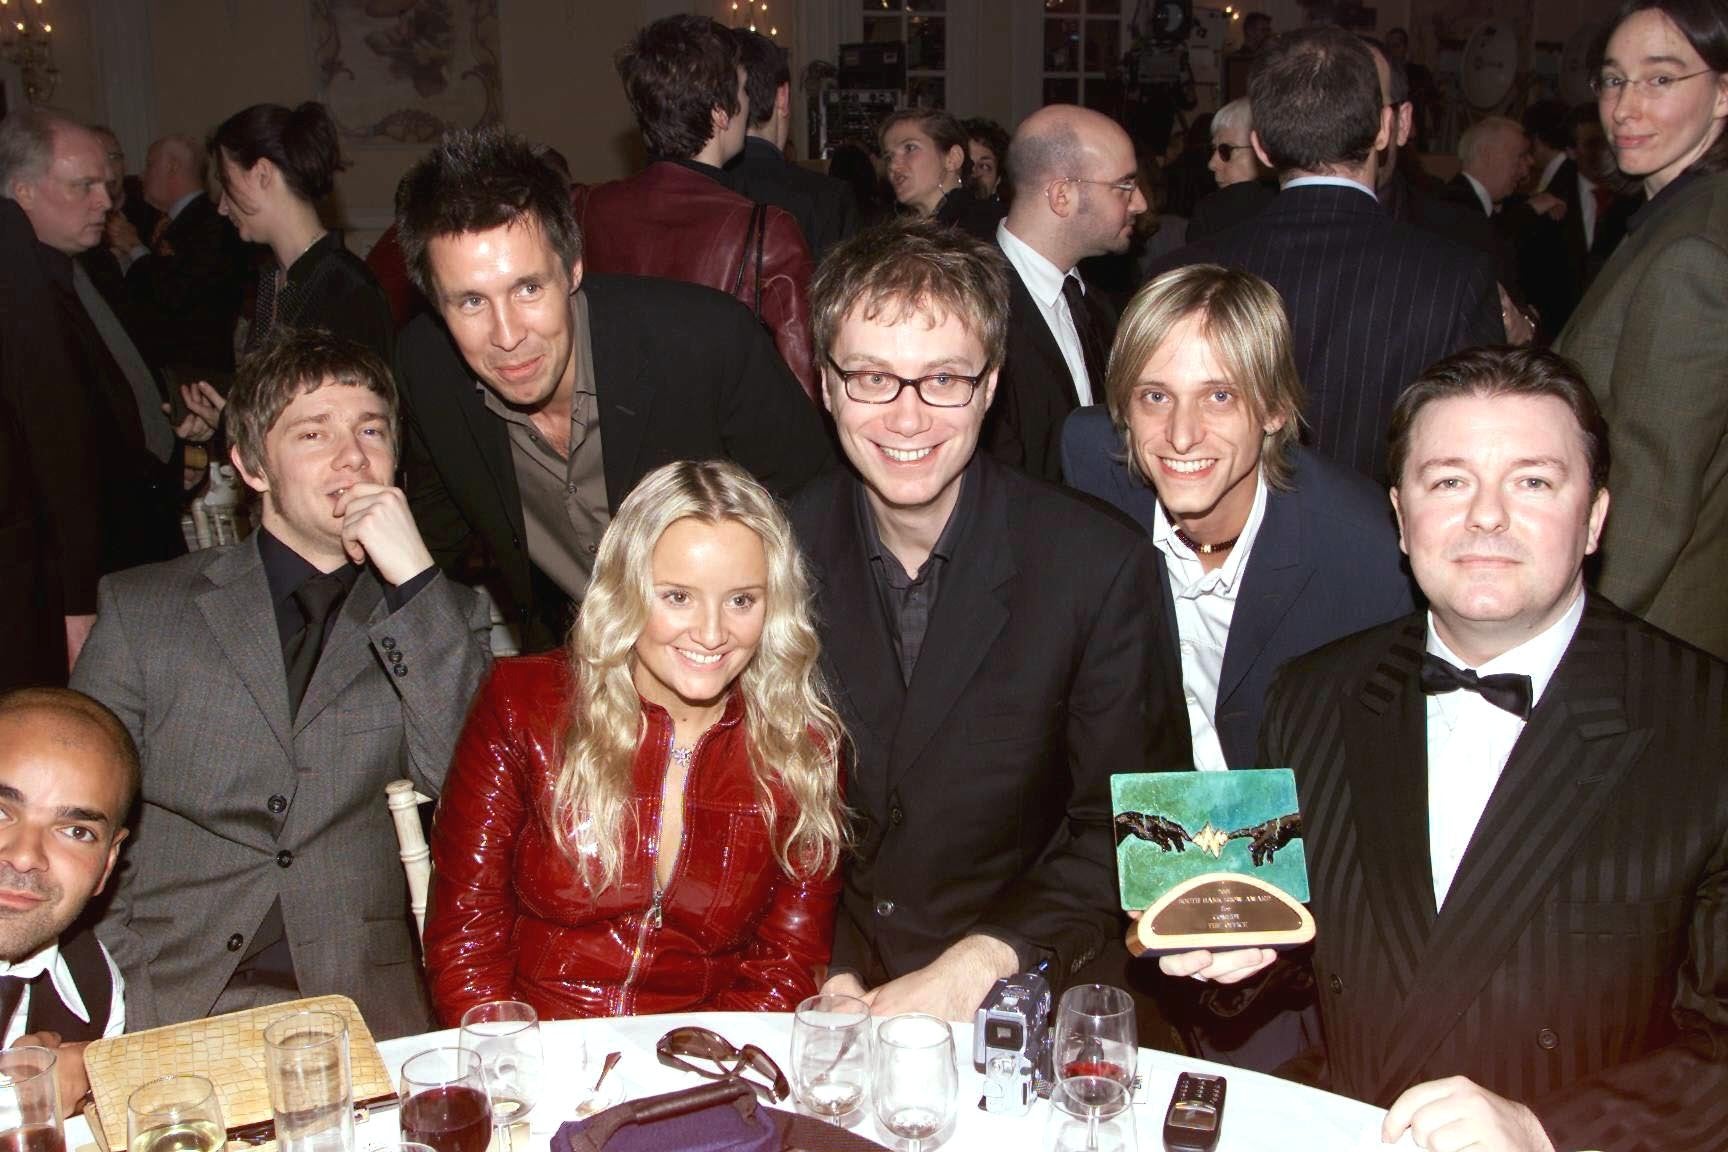 The cast of ‘The Office’ at the 2002 South Bank Show awards at London’s Savoy Hotel. Ricky Gervais holds the award for comedy of the year